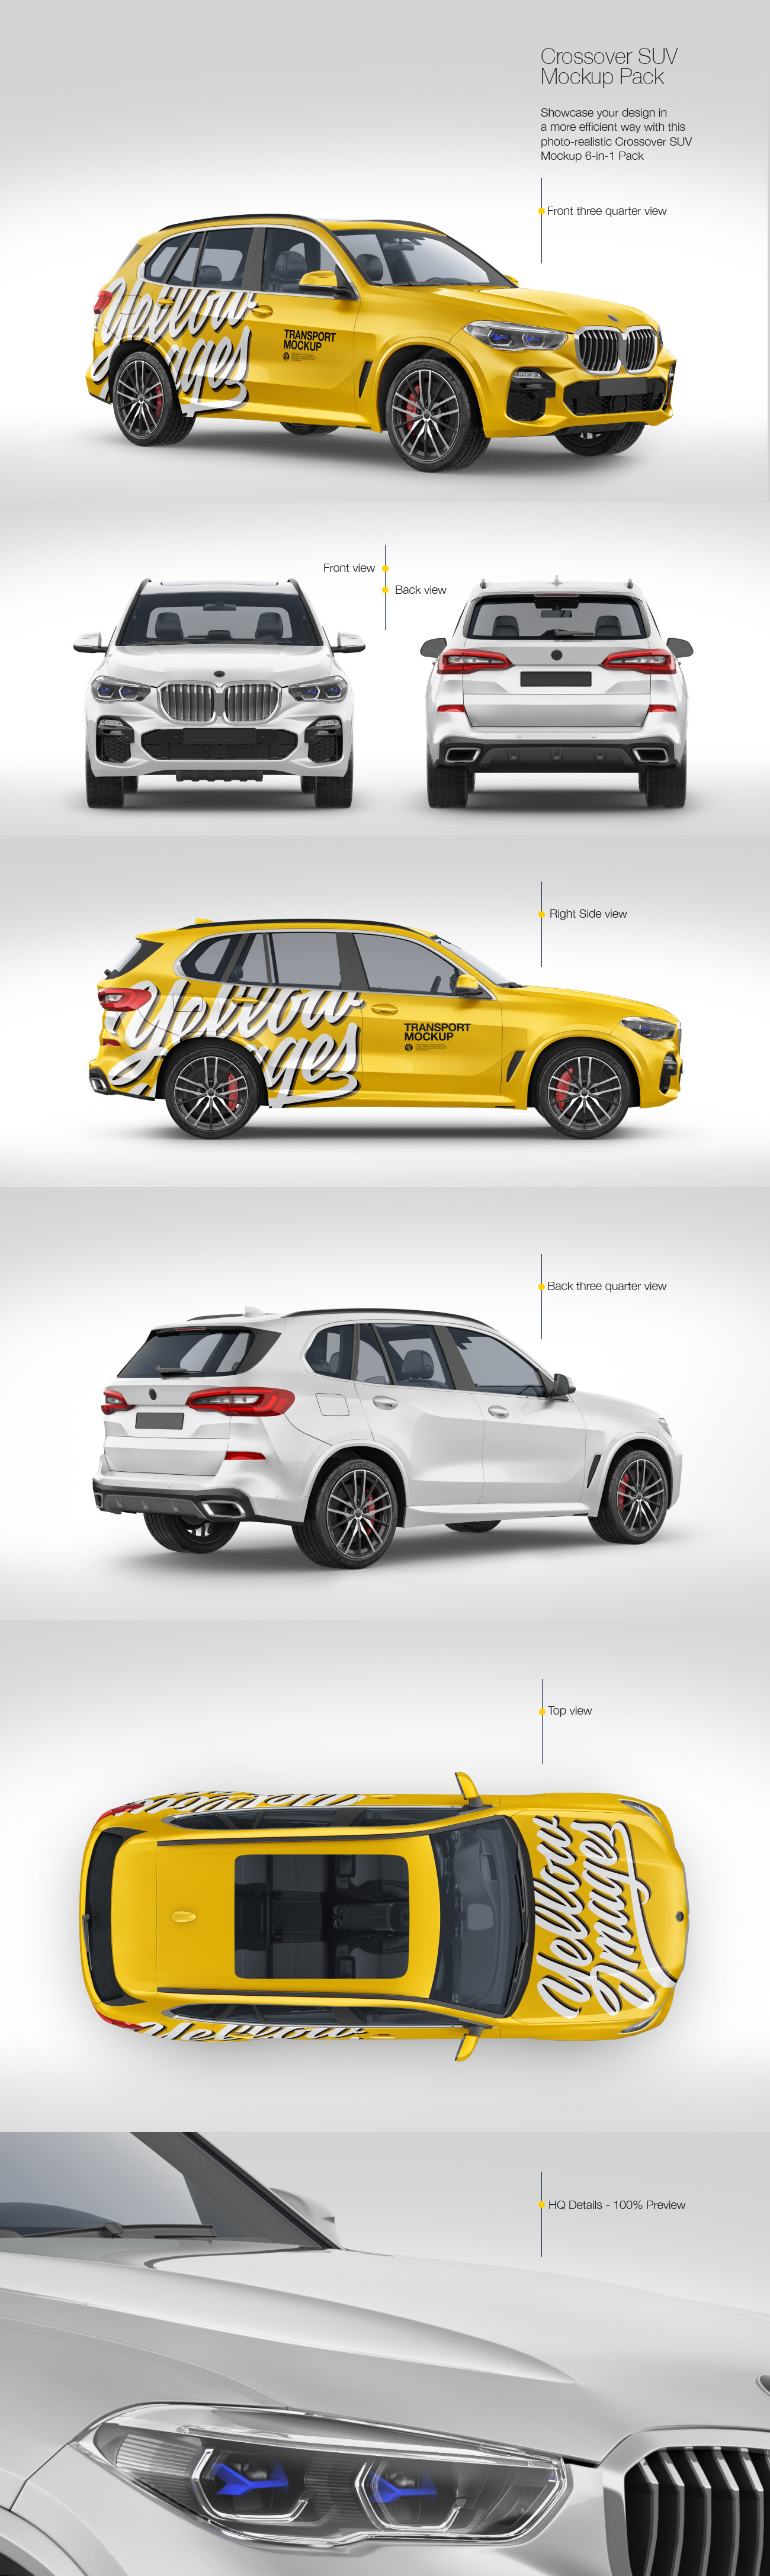 Crossover SUV Mockup Pack on Yellow Images Creative Store